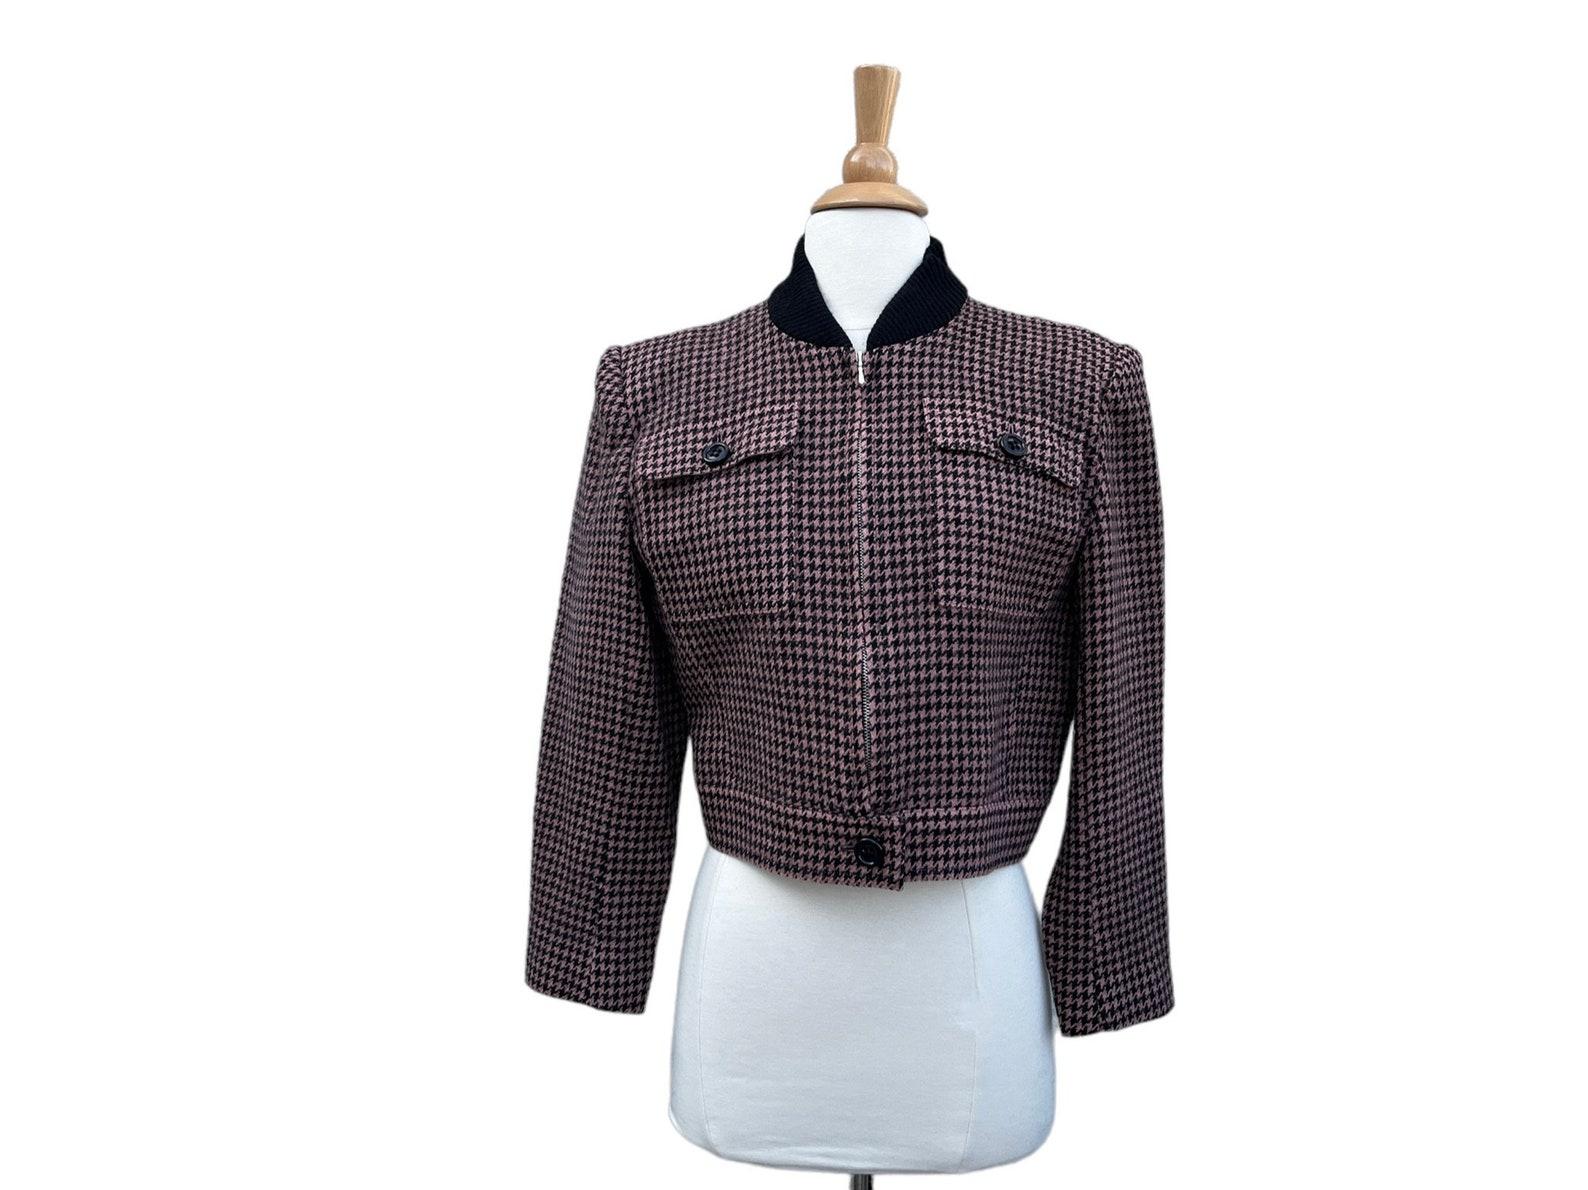 Guy Laroche houndstooth jacket In Good Condition For Sale In Brooklyn, NY